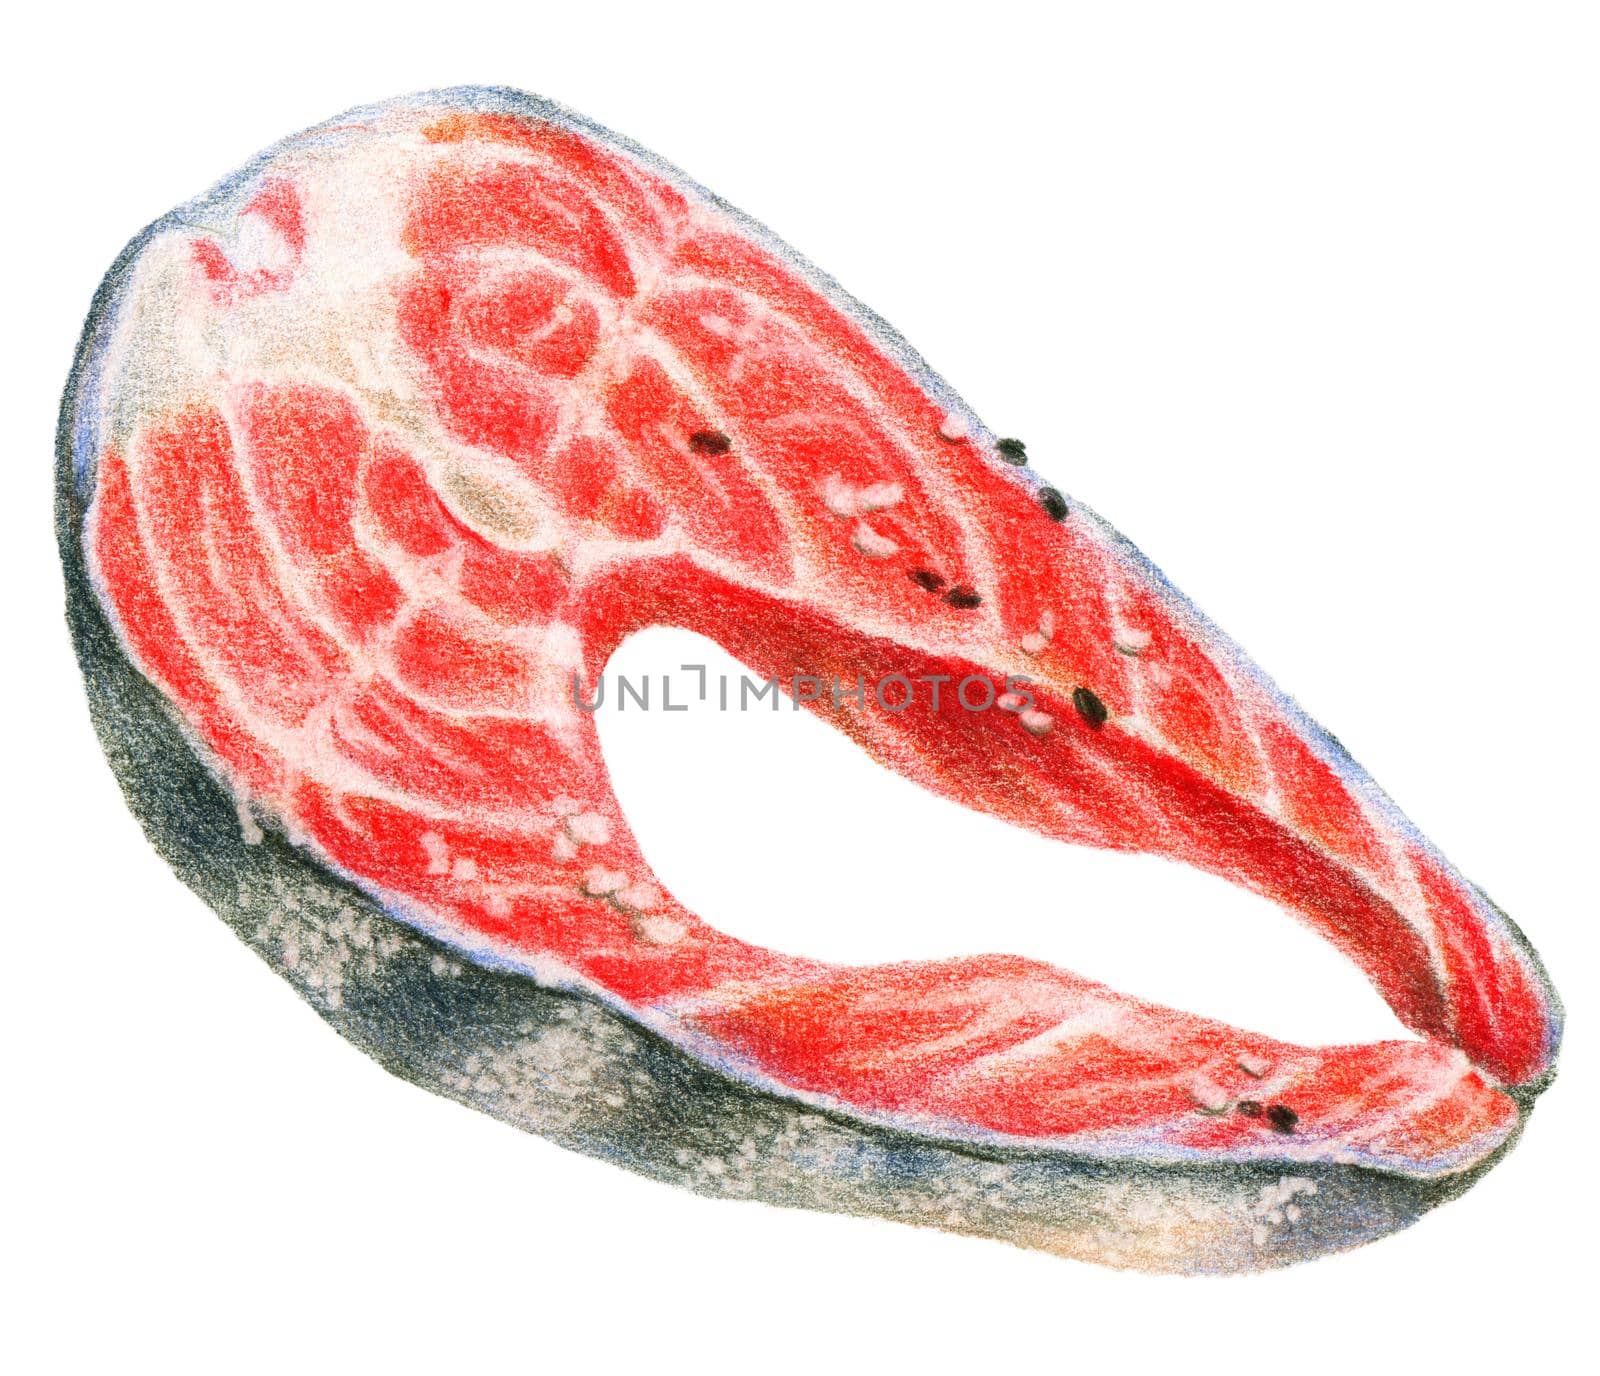 Color pencils realistic illustration of seafood - salmon steak. Hand-drawn object on white background.